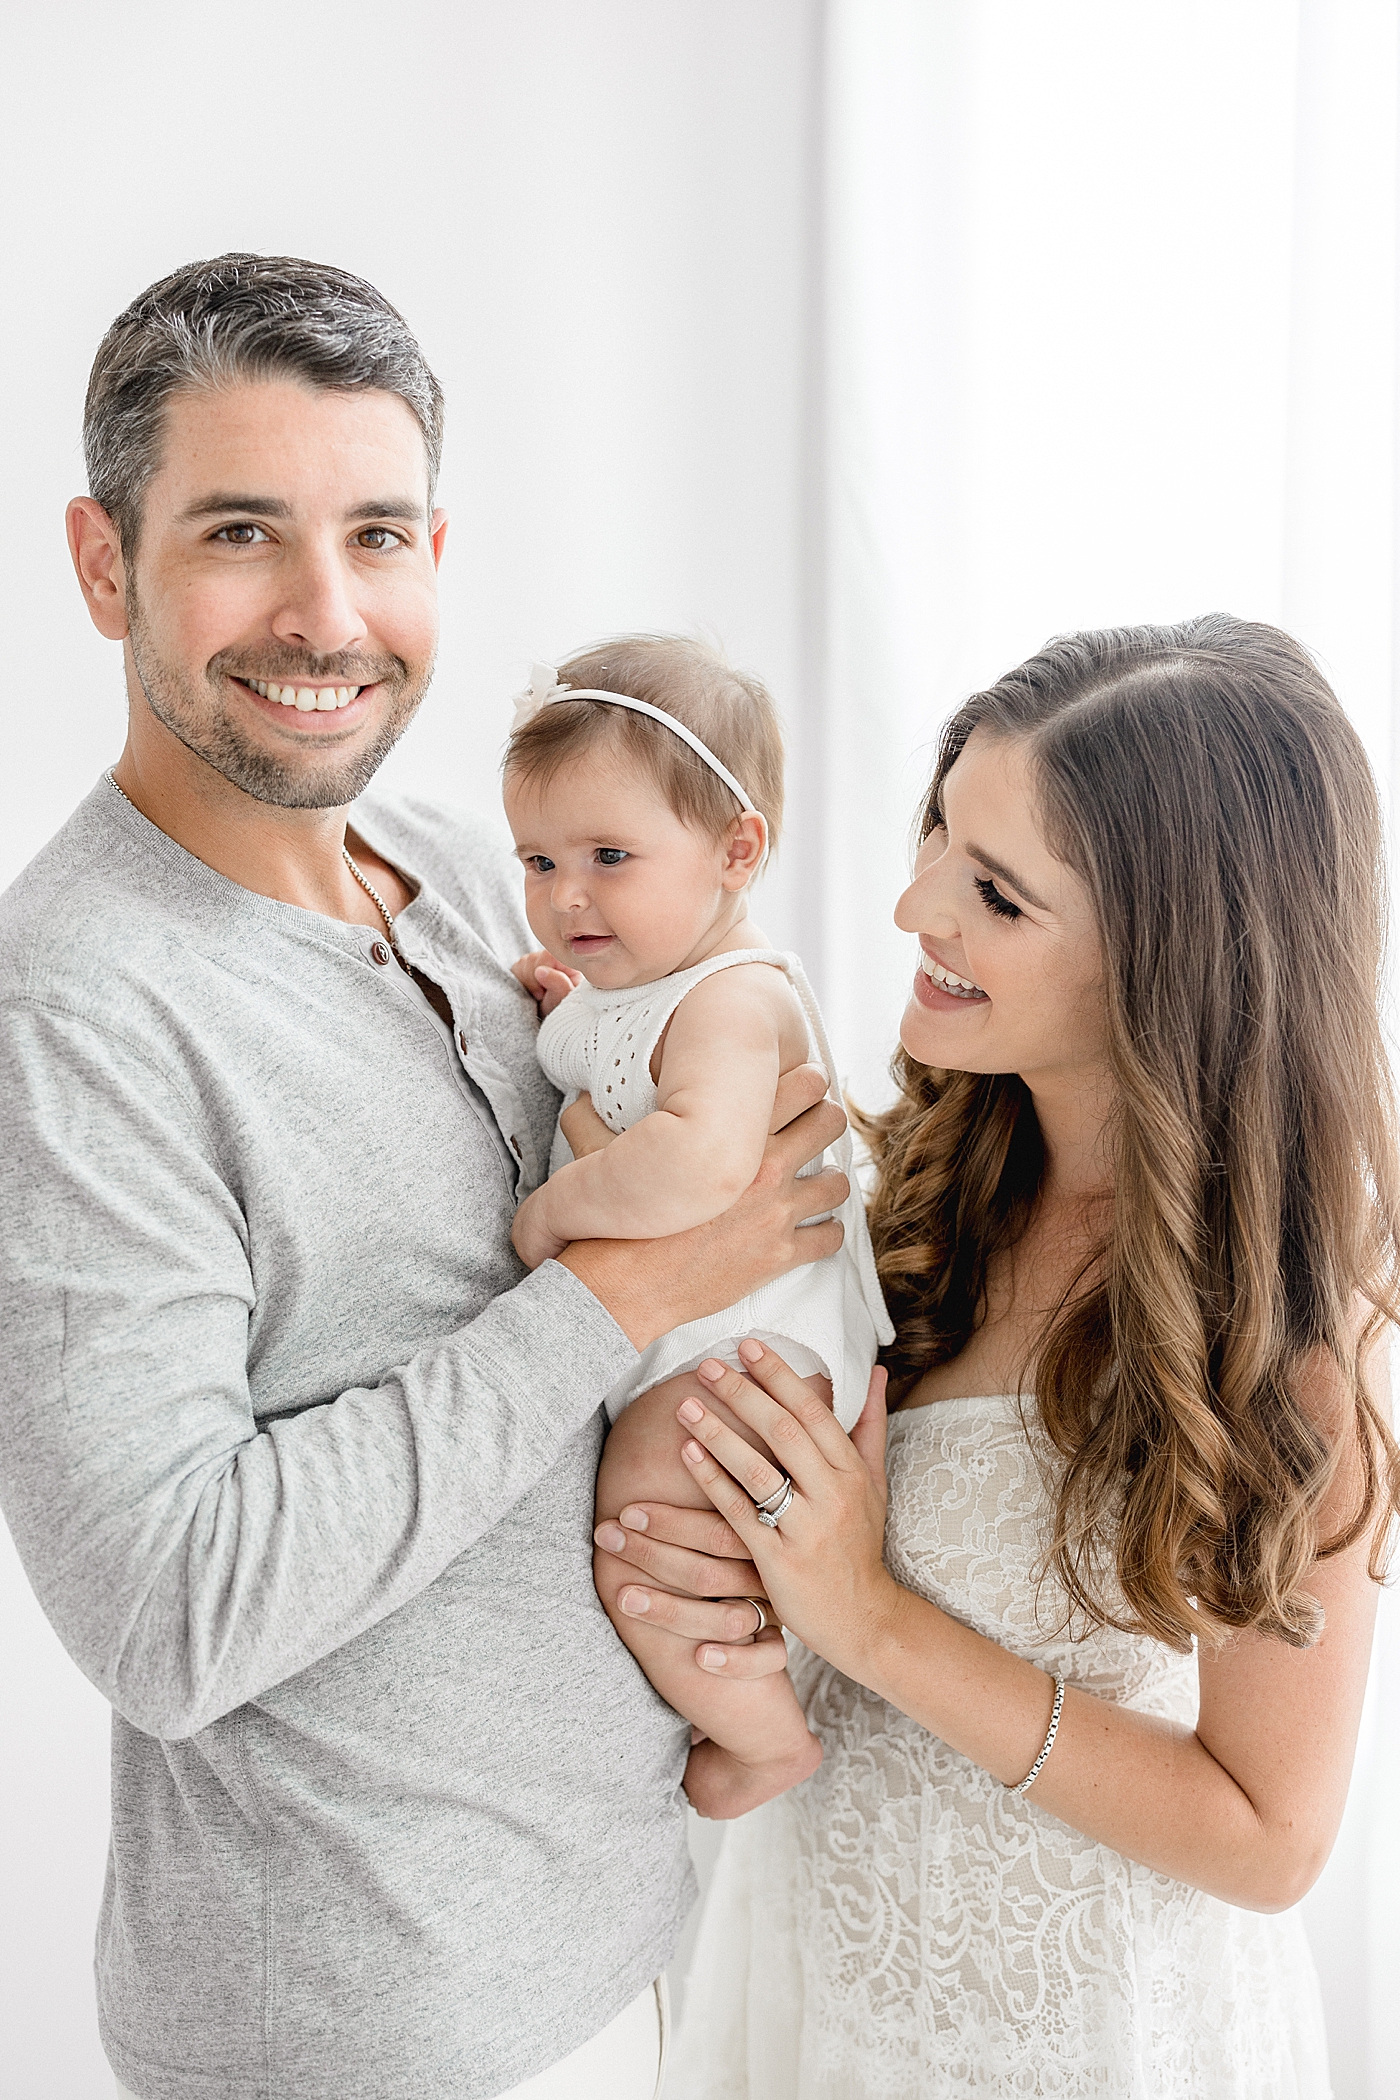 Parents hold six month old baby girl for photos. Photos by Brittany Elise Photography.